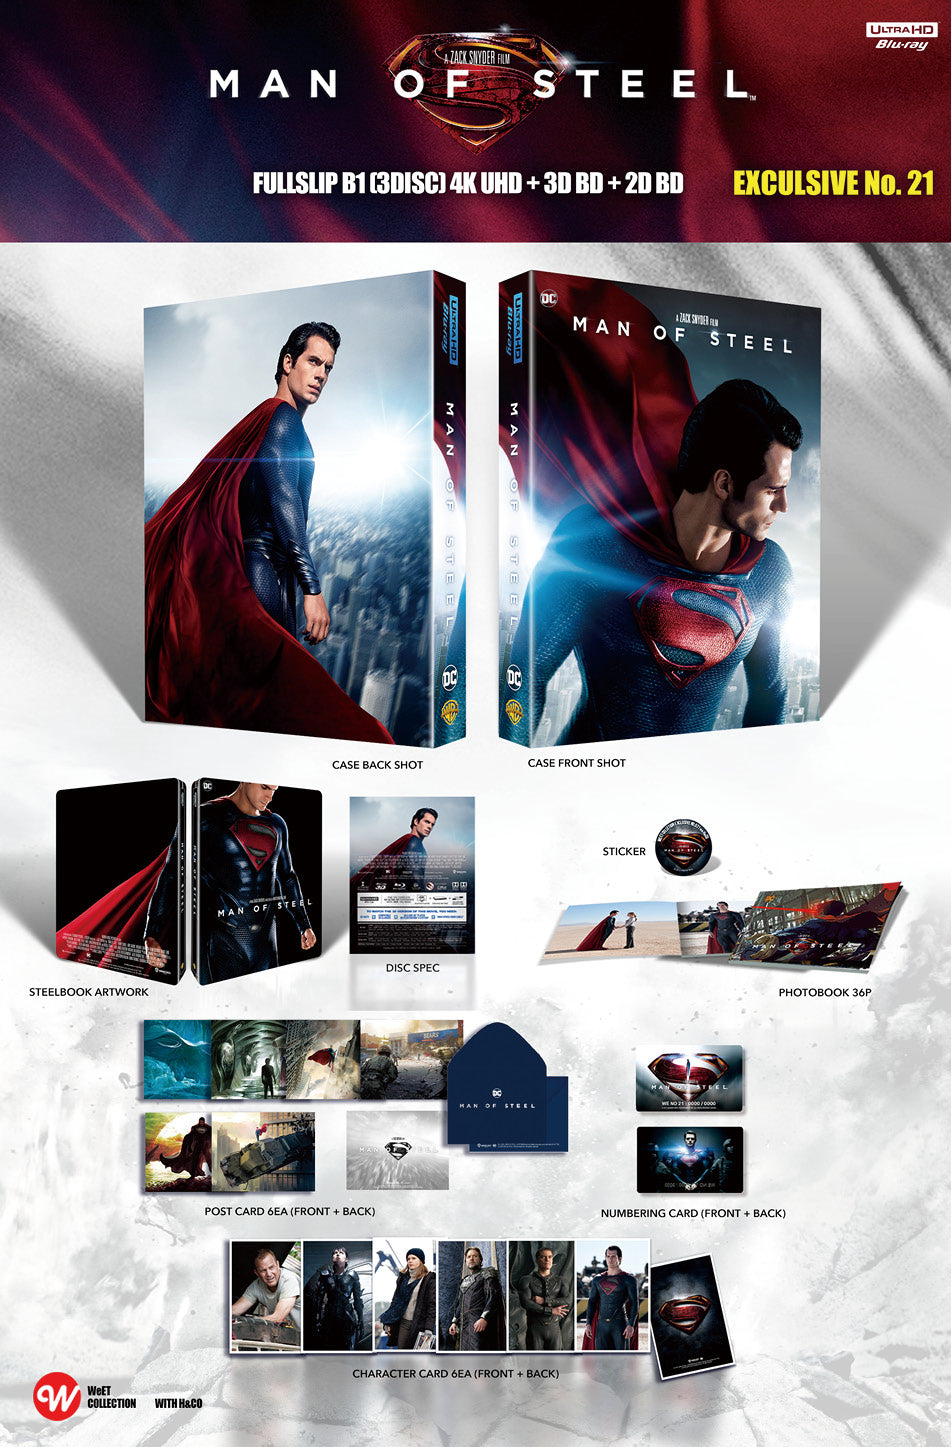 Man Of Steel 4K Blu-ray Steelbook WeET Collection Exclusive #21 HDN GB Pre-Order One Click Box Set